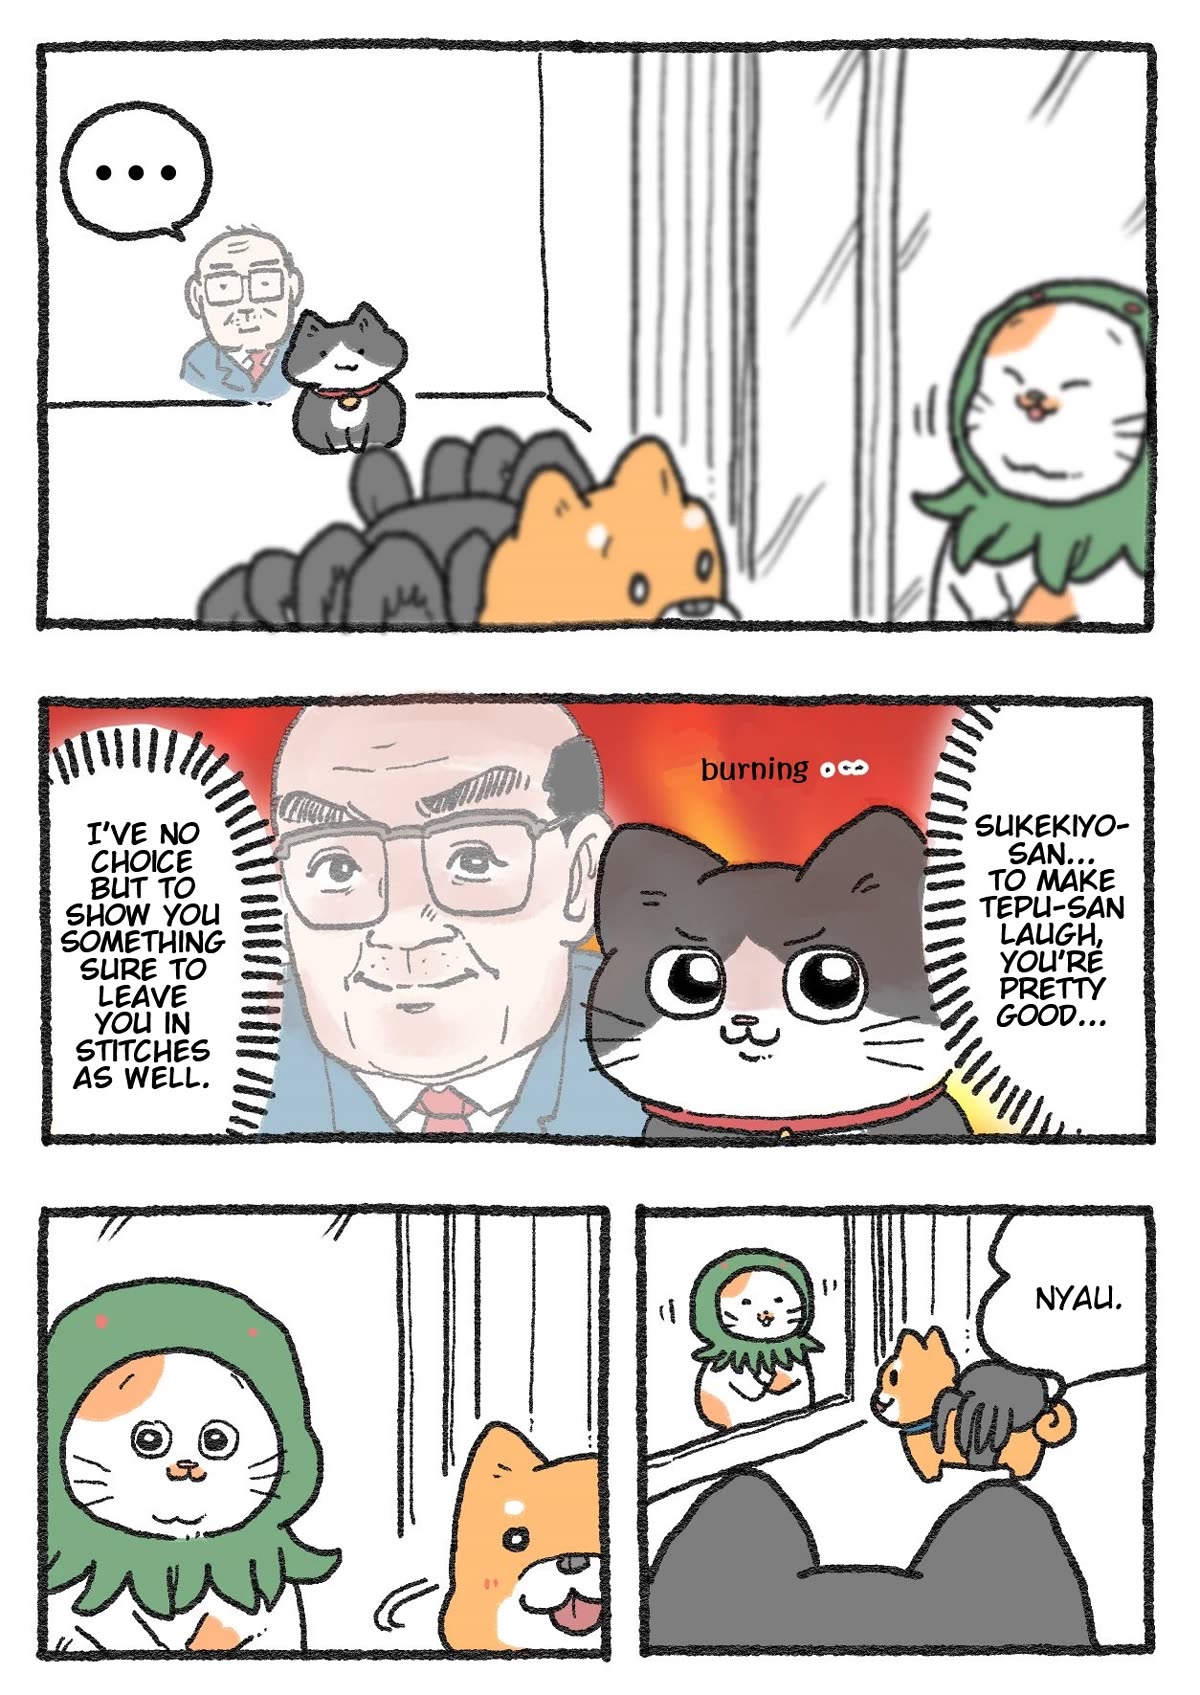 The Old Man Who Was Reincarnated As A Cat - Page 1